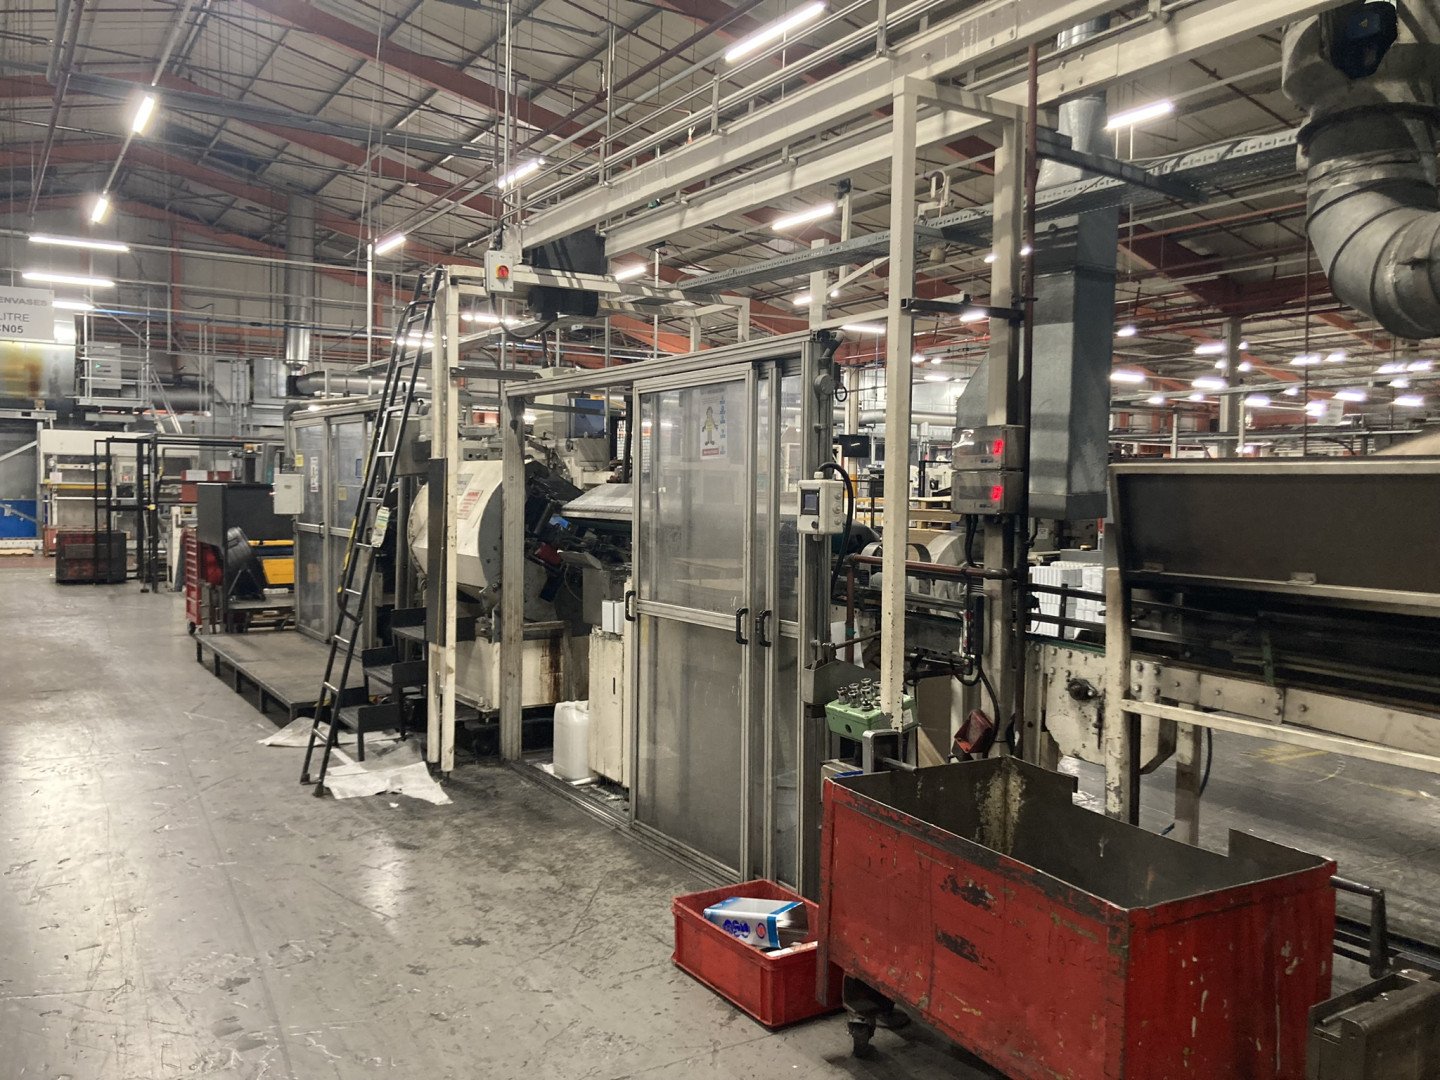 5 LTR F-Style manufacturing line